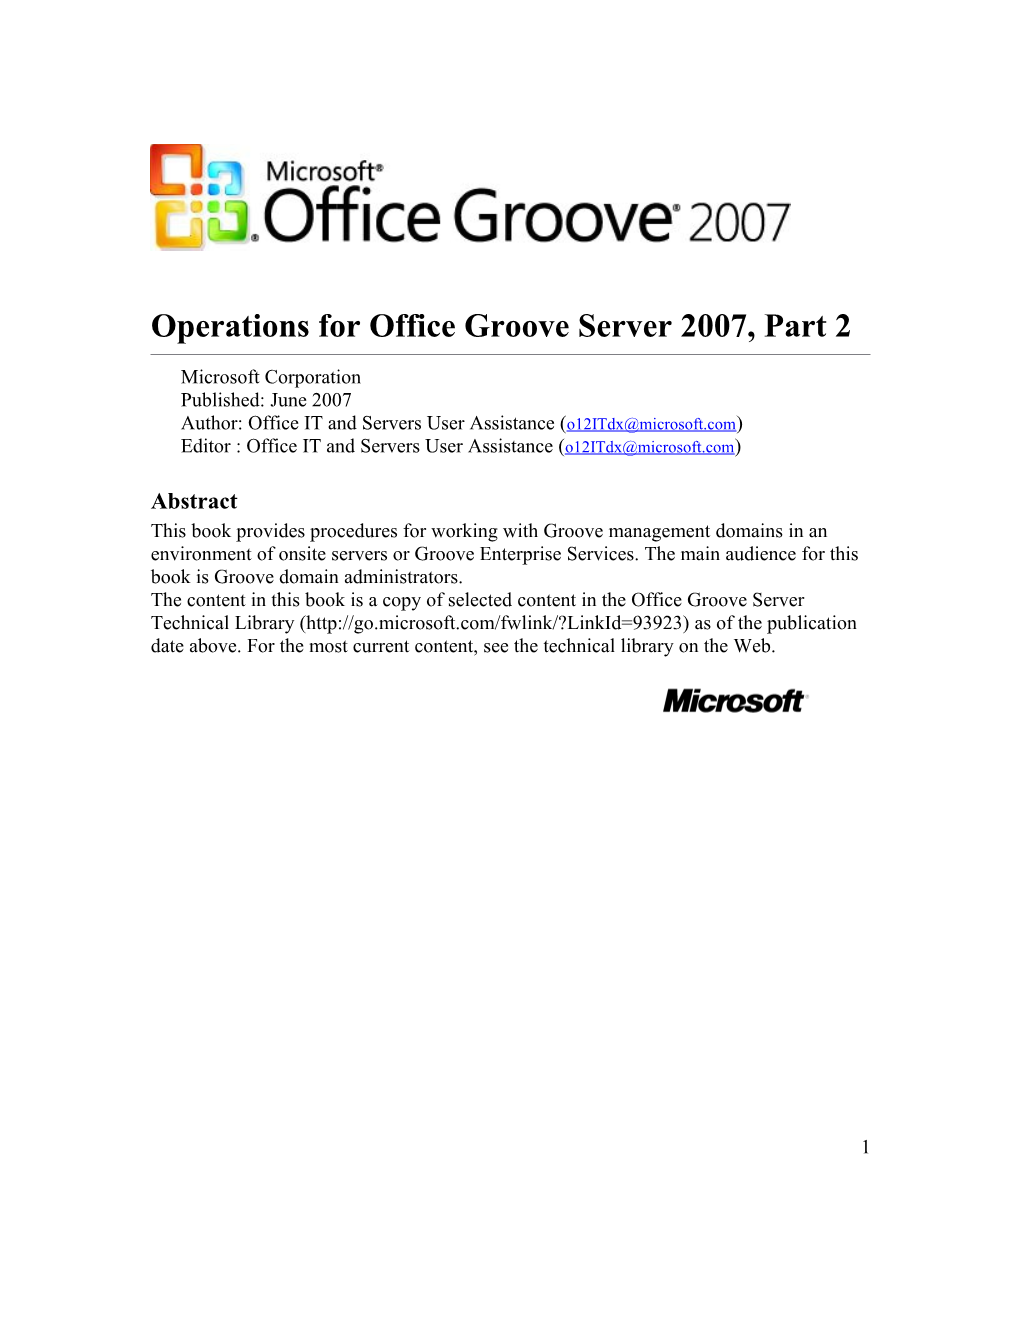 Operations for Office Groove Server 2007, Part 2